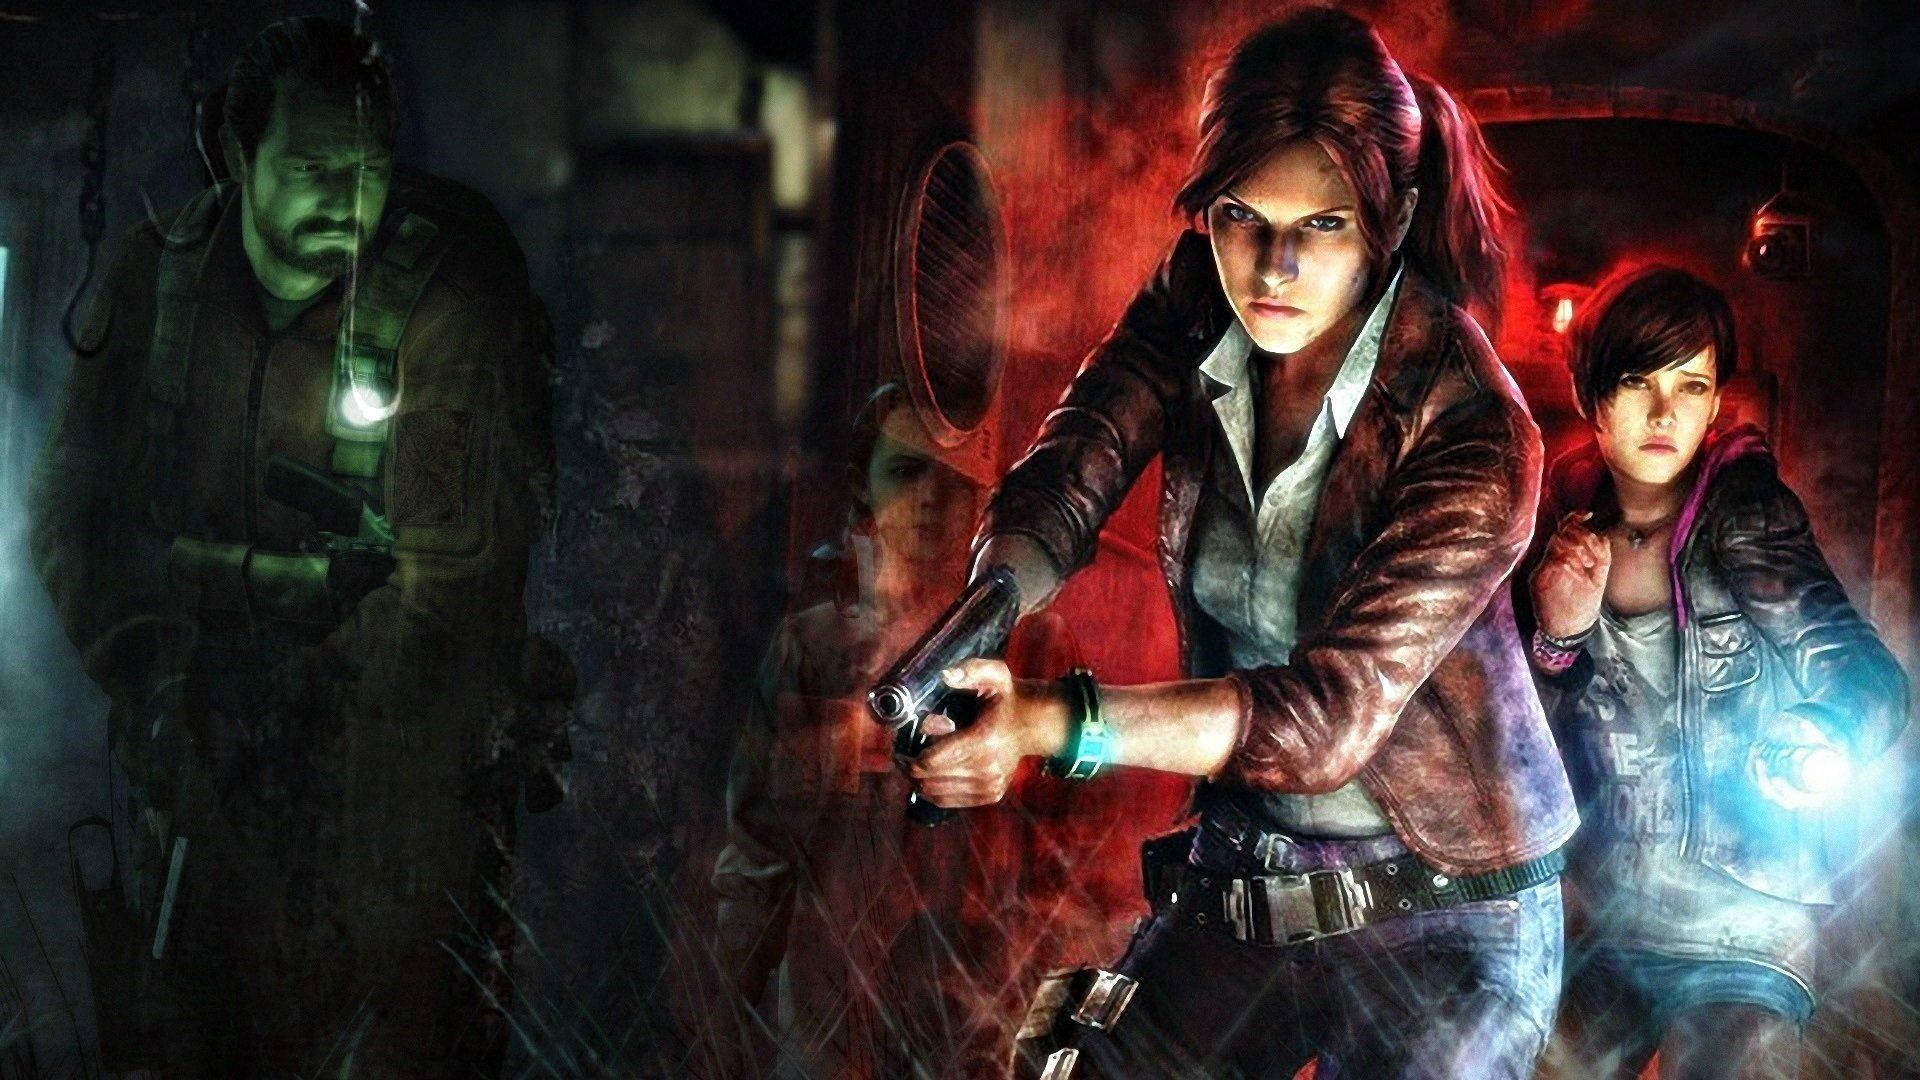 Claire and Moira partner up to survive Resident Evil 2 remake Wallpaper